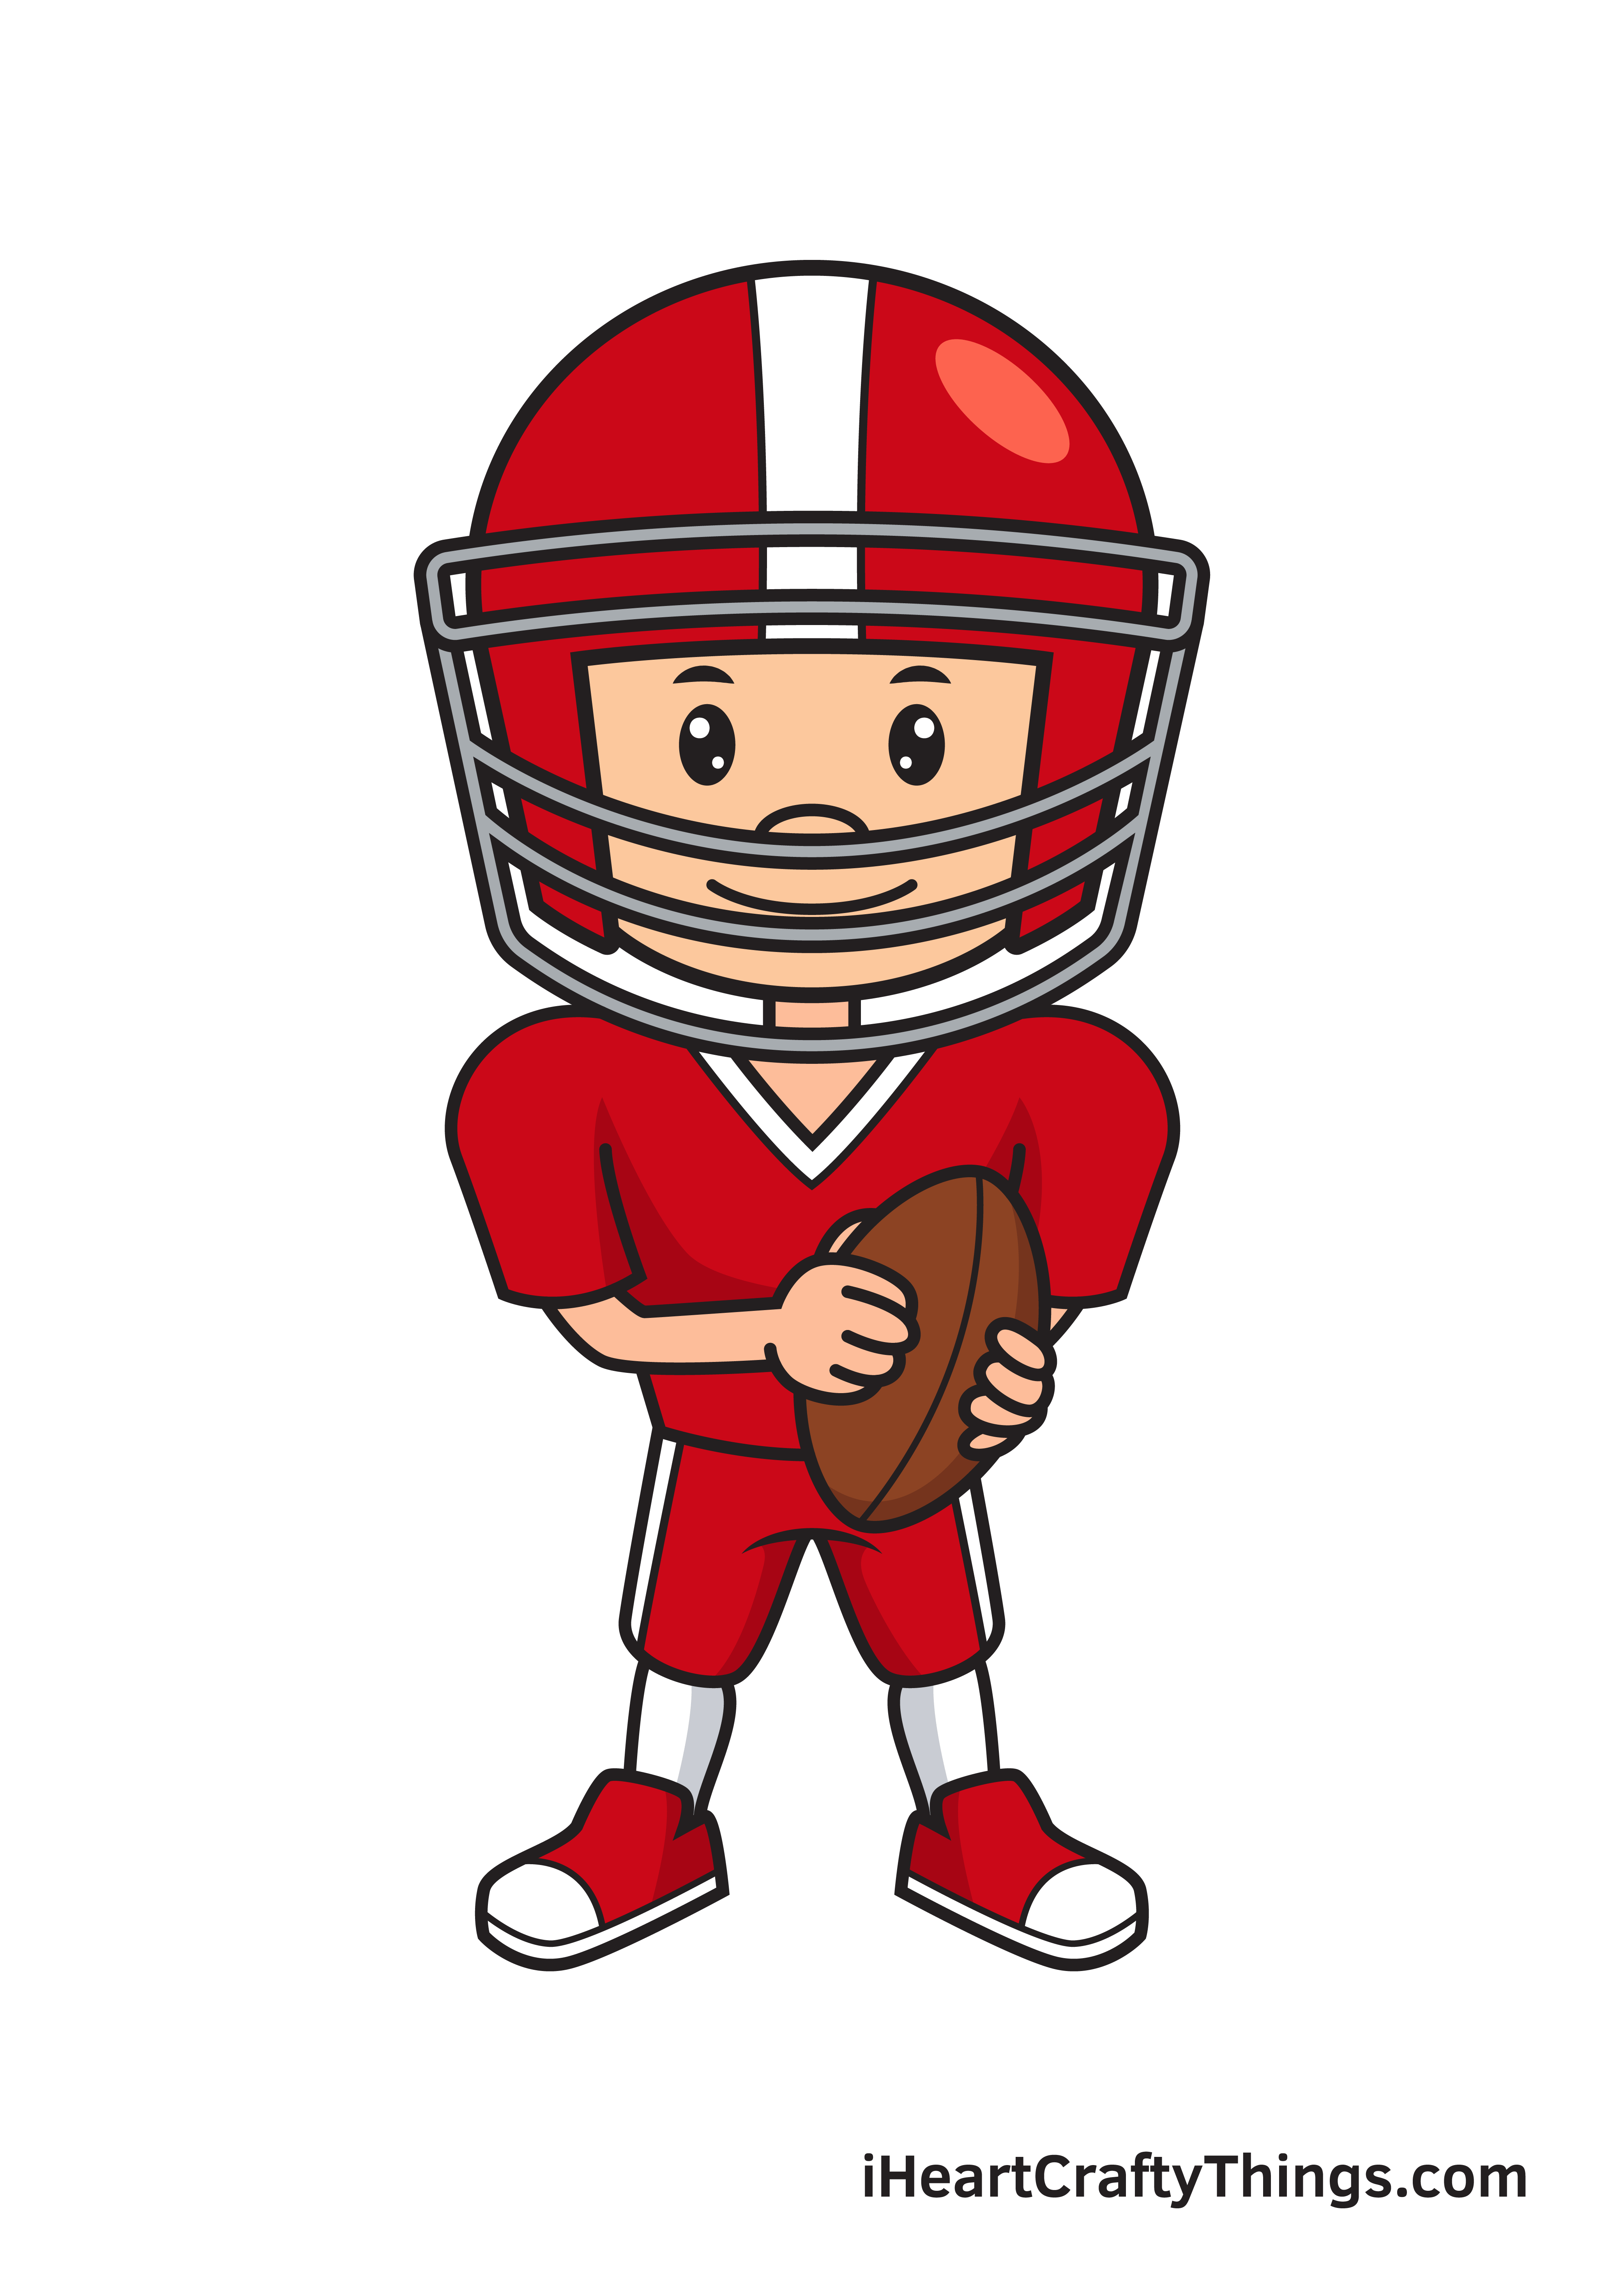 Football Player Drawing - How To Draw A Football Player Step By Step